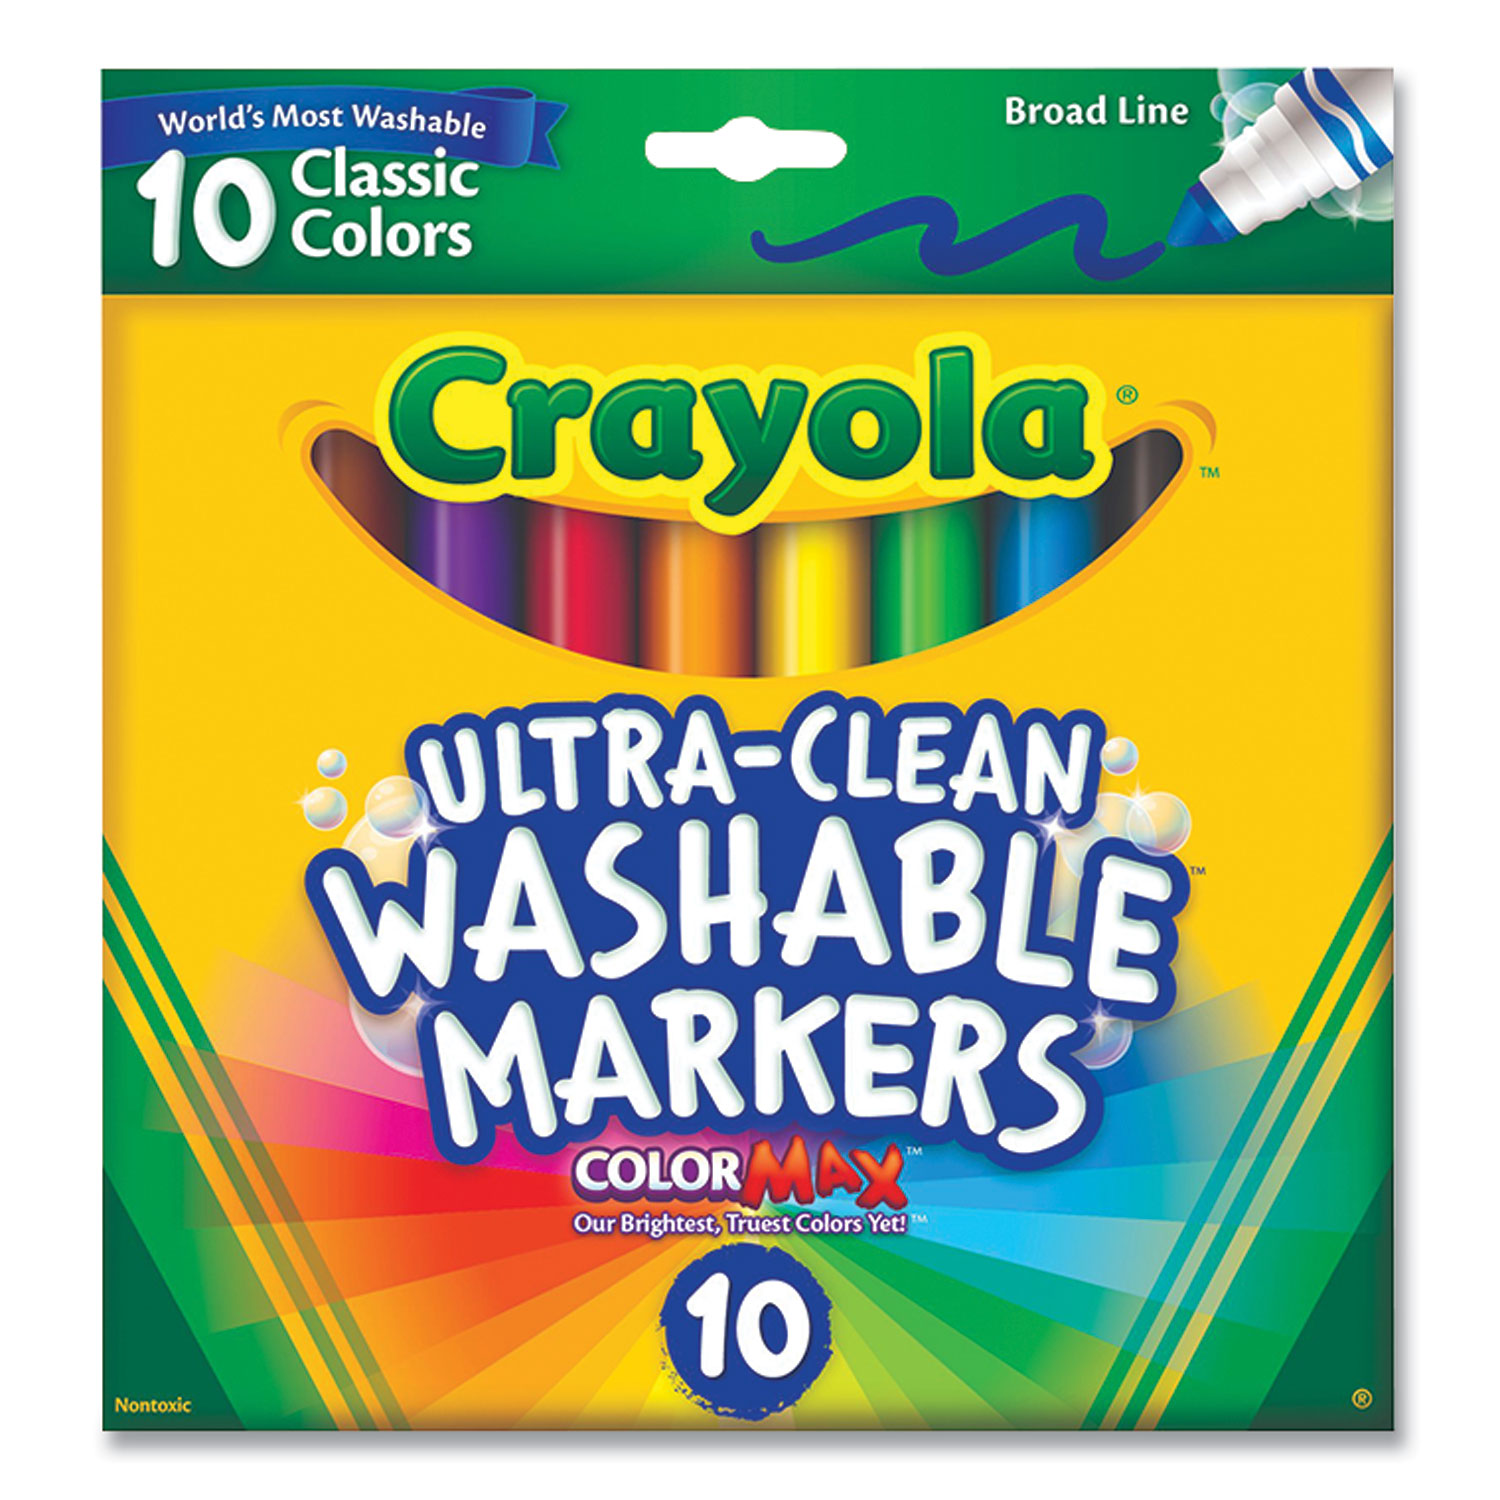  Crayola 58-7851 Ultra-Clean Washable Markers, Broad Bullet Tip, Assorted Colors, 10/Pack (CYO578609) 